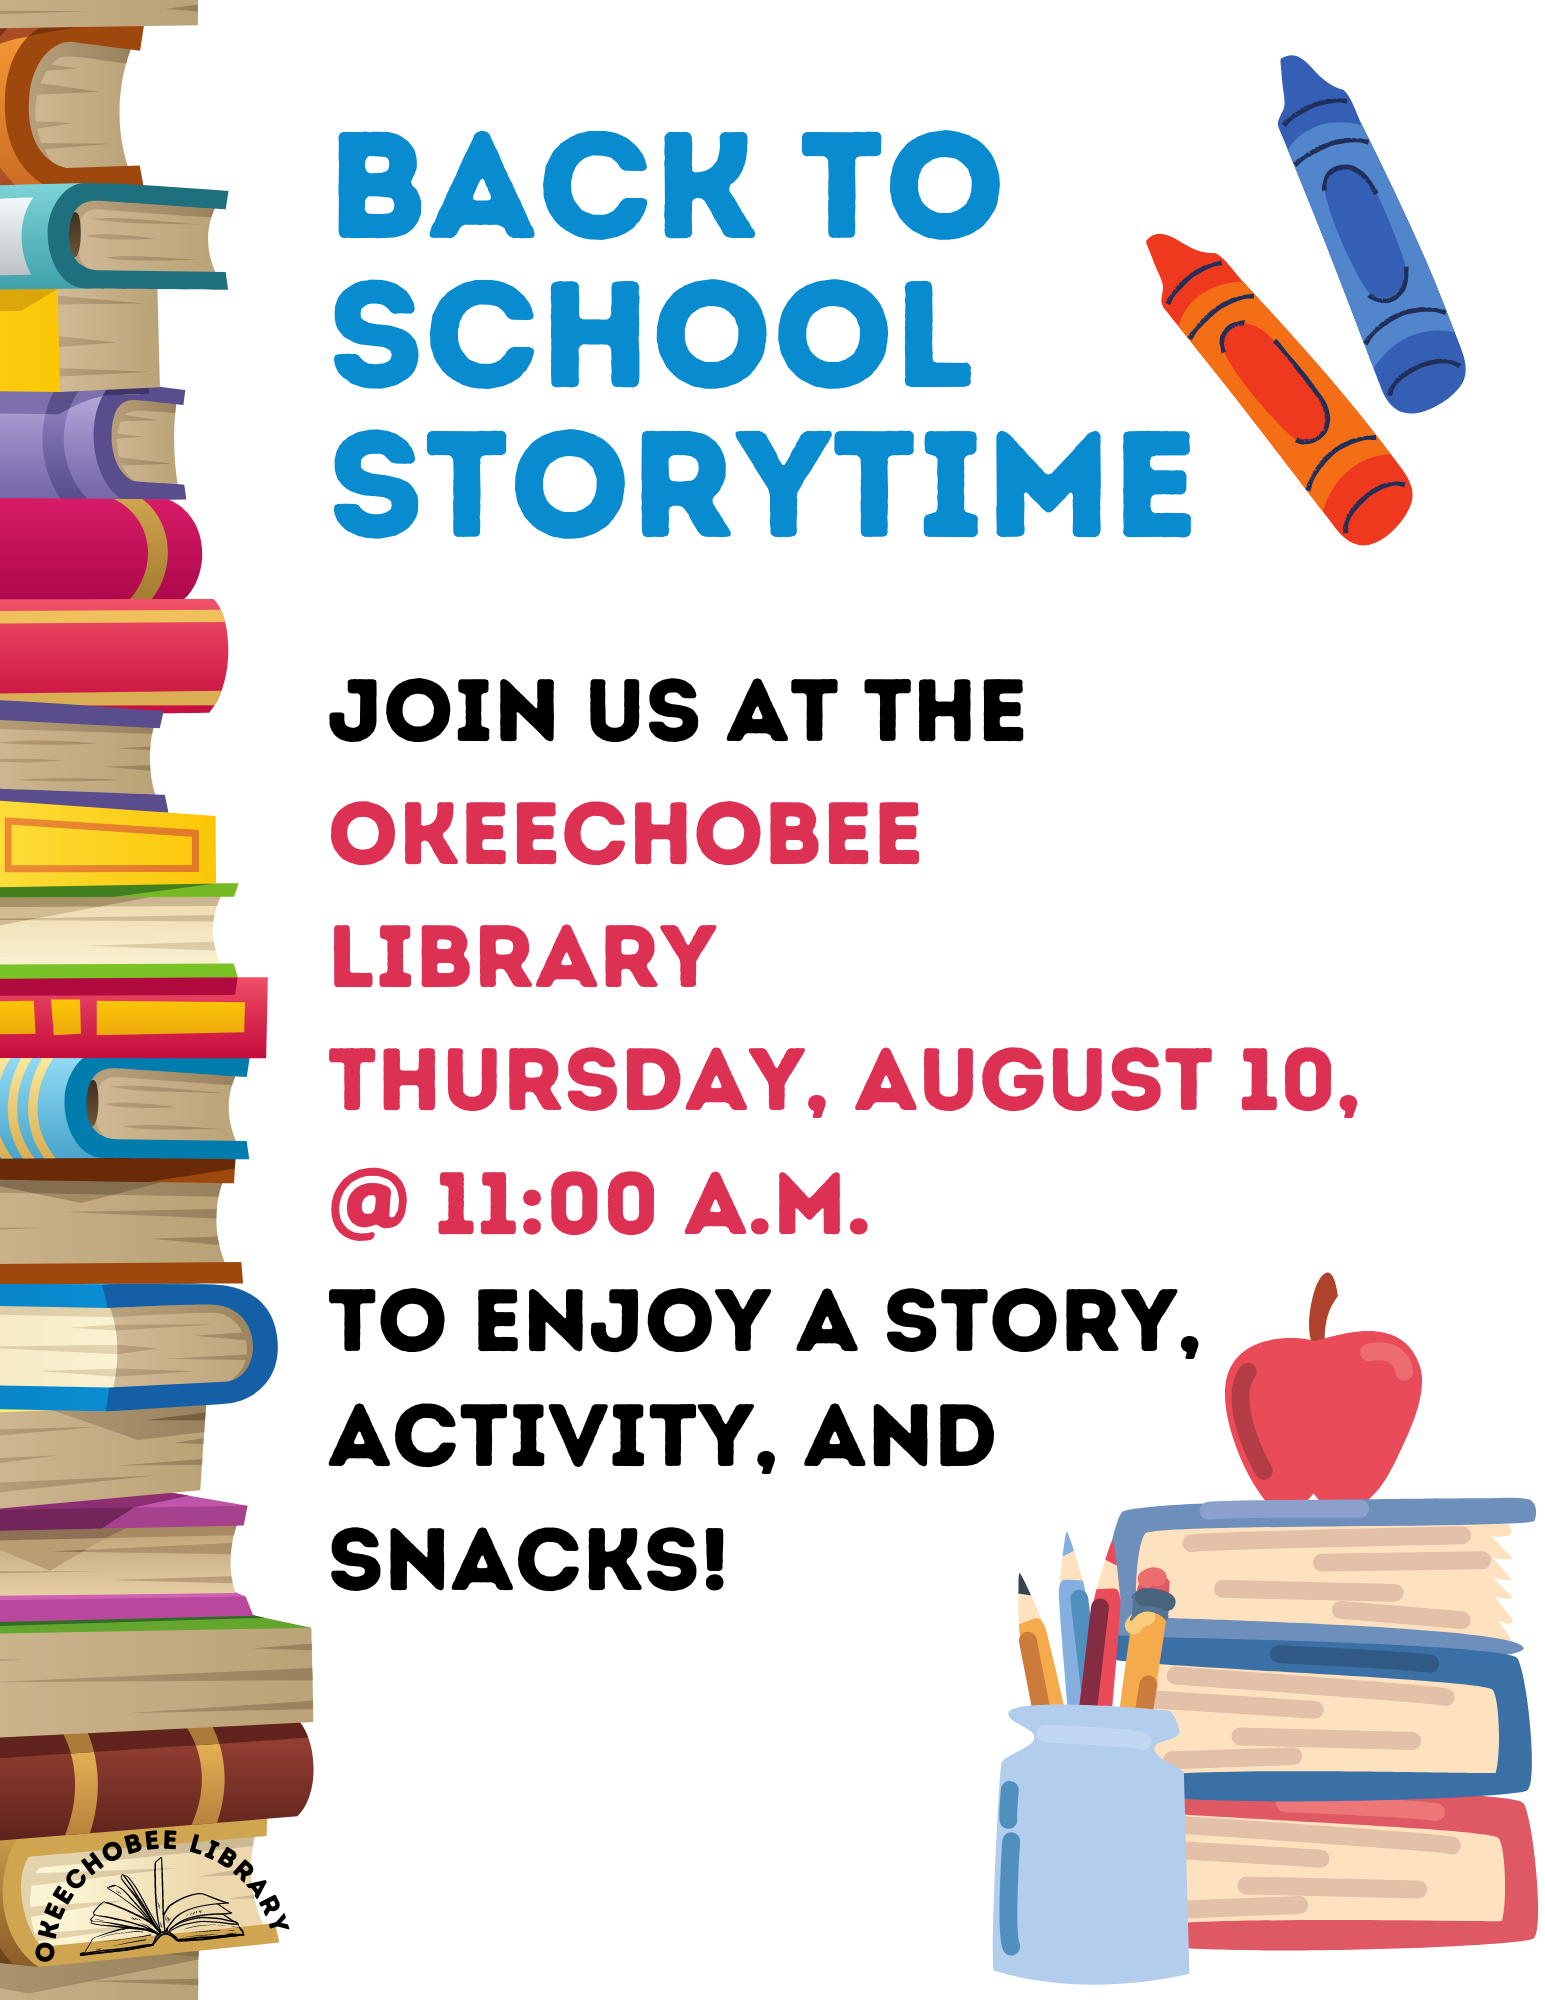 Join us at the Okeechobee Library on August 10th at 11:00 A.M. for our Back to School Story Time! Come enjoy a story, a simple activity, and fun snacks!